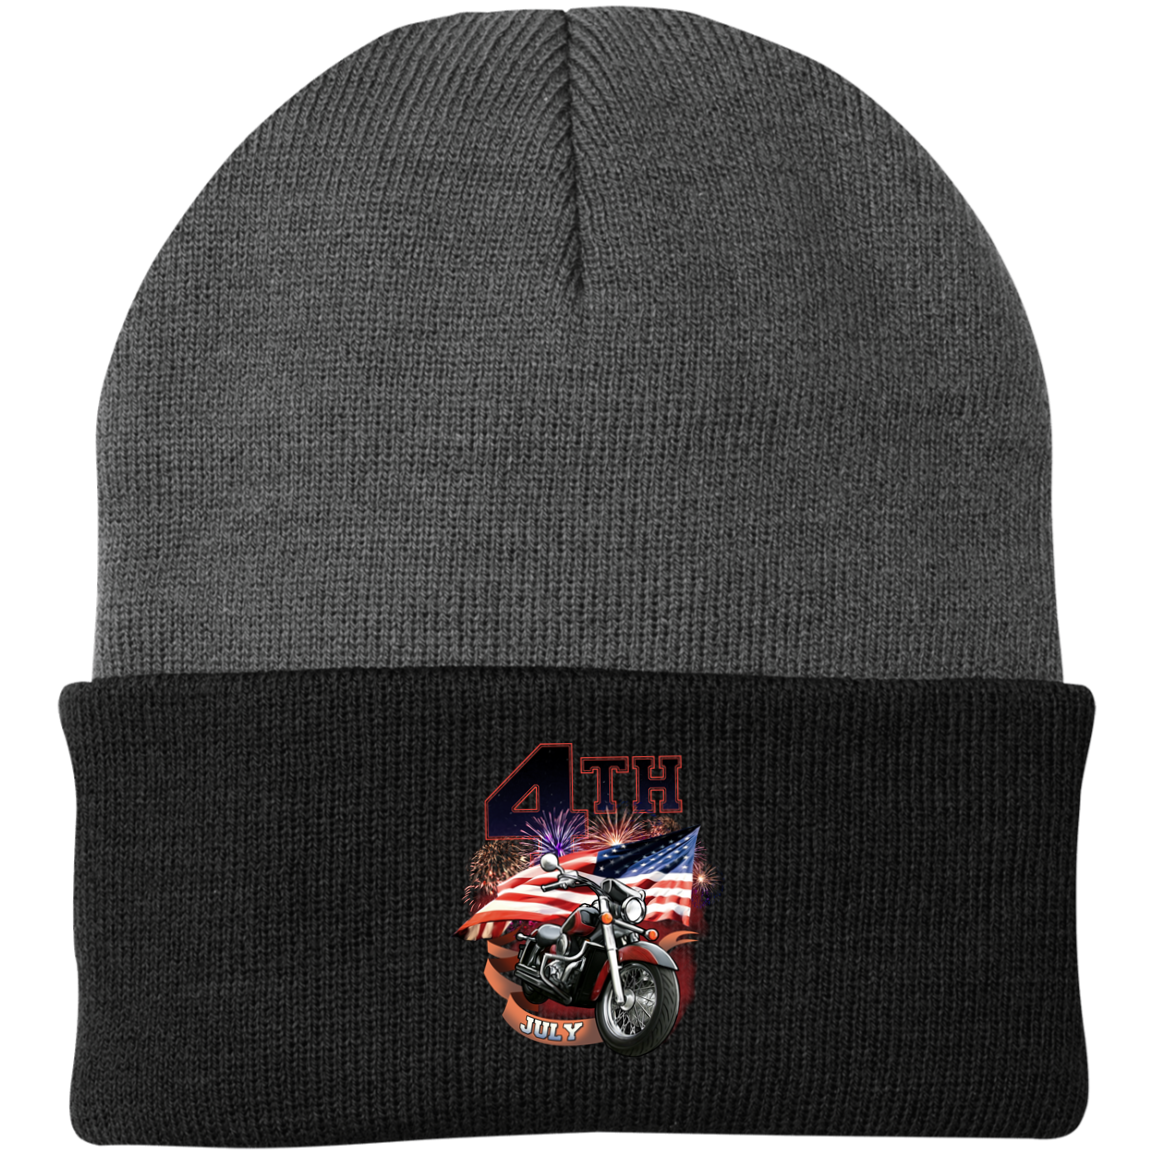 4th of July Knit Cap, Unisex, Acrylic, One Size Fits Most - American Legend Rider